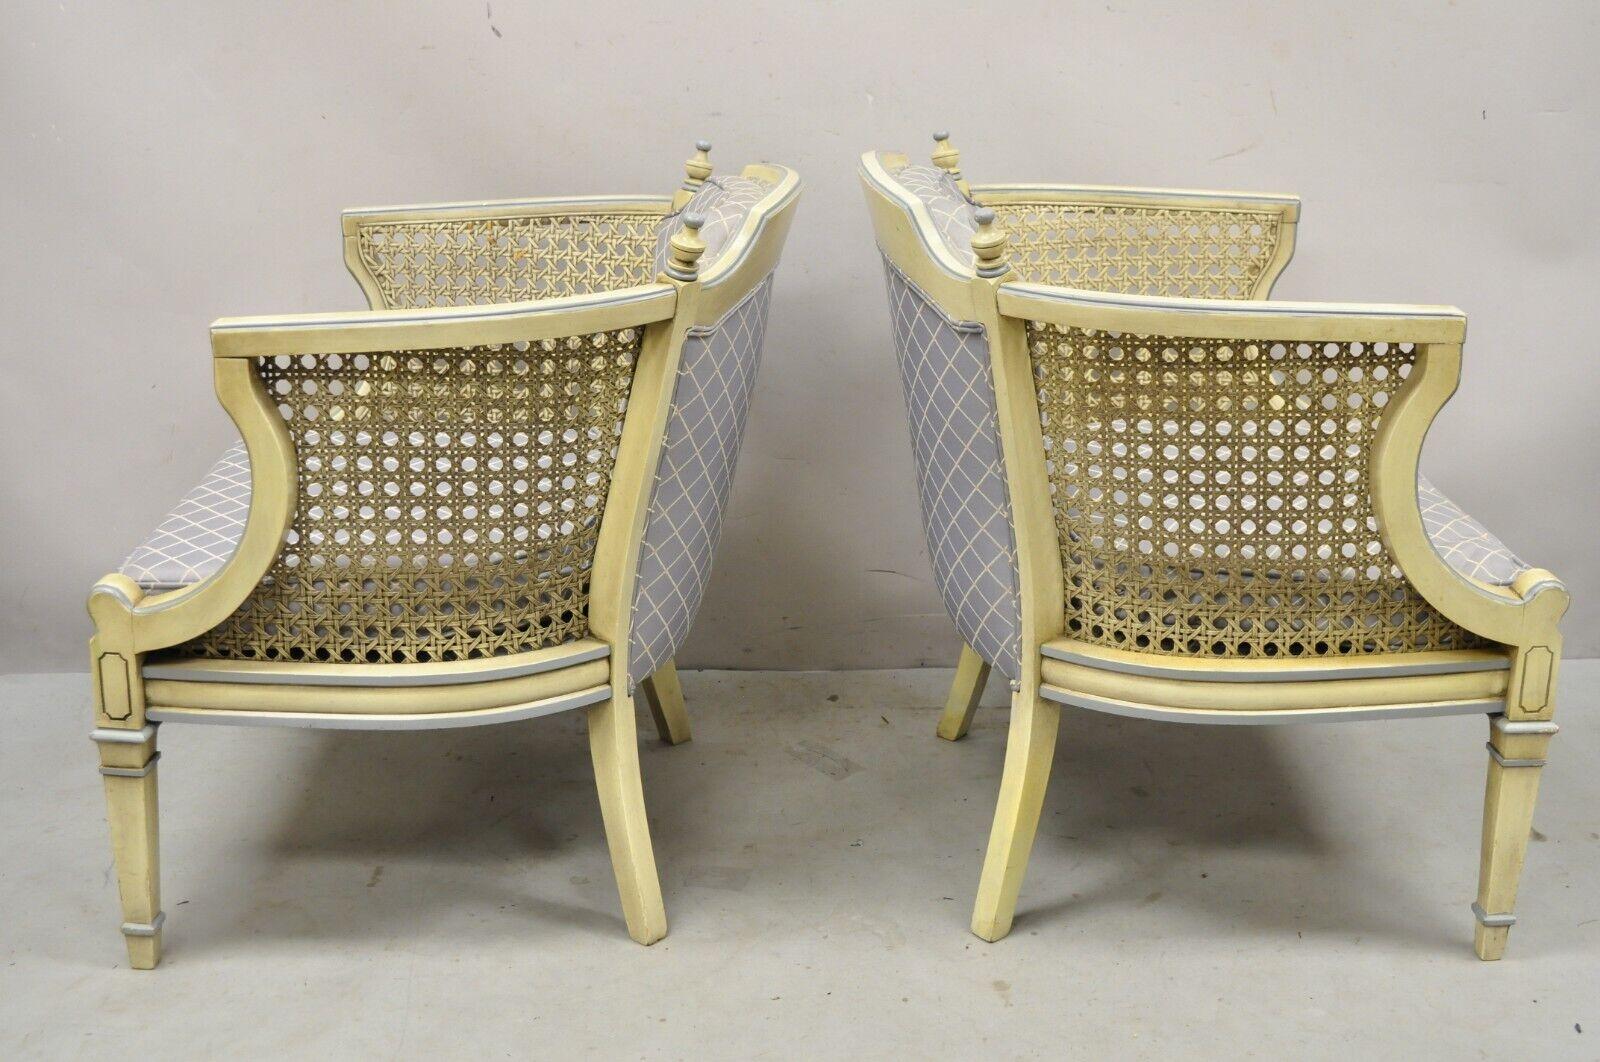 Vintage Hollywood Regency Cream Painted Cane Side Club Lounge Chairs, Pair For Sale 3